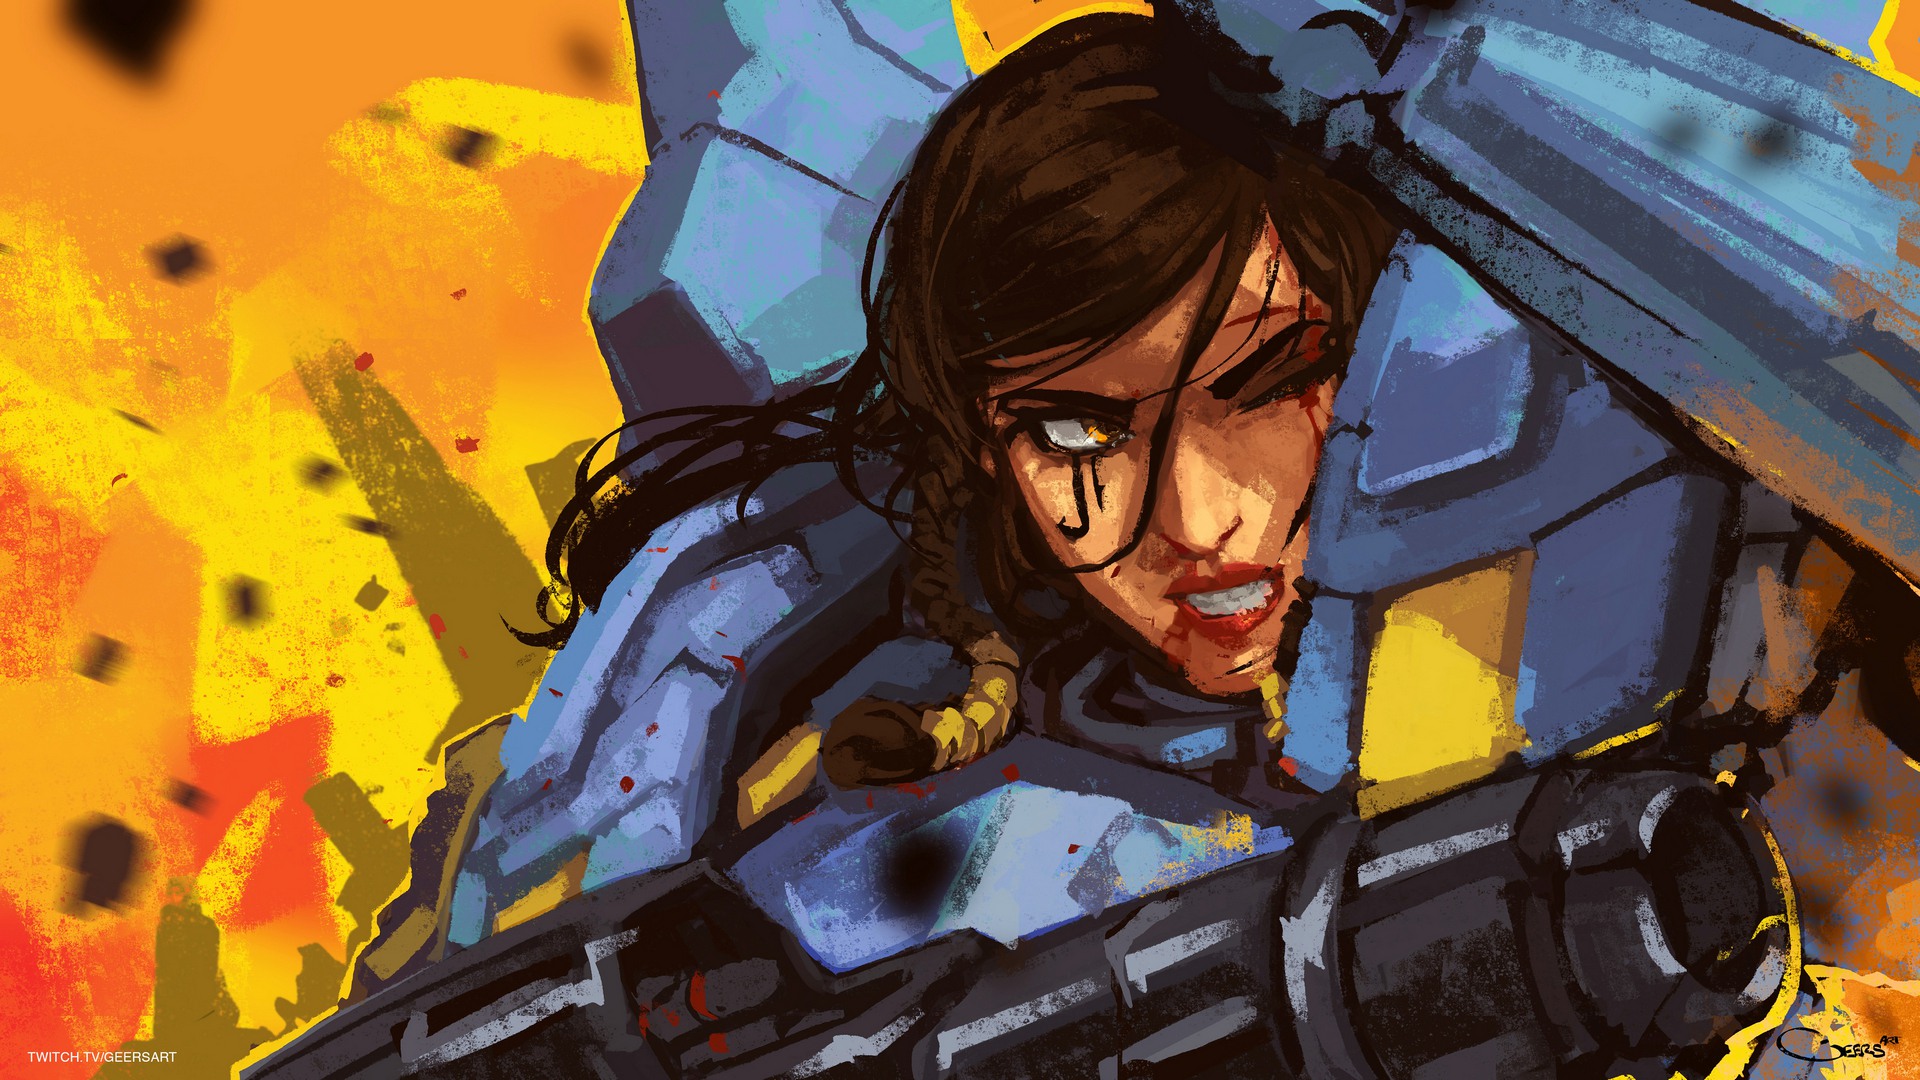 General 1920x1080 video games Overwatch Pharah (Overwatch) video game characters Blizzard Entertainment Egyptian